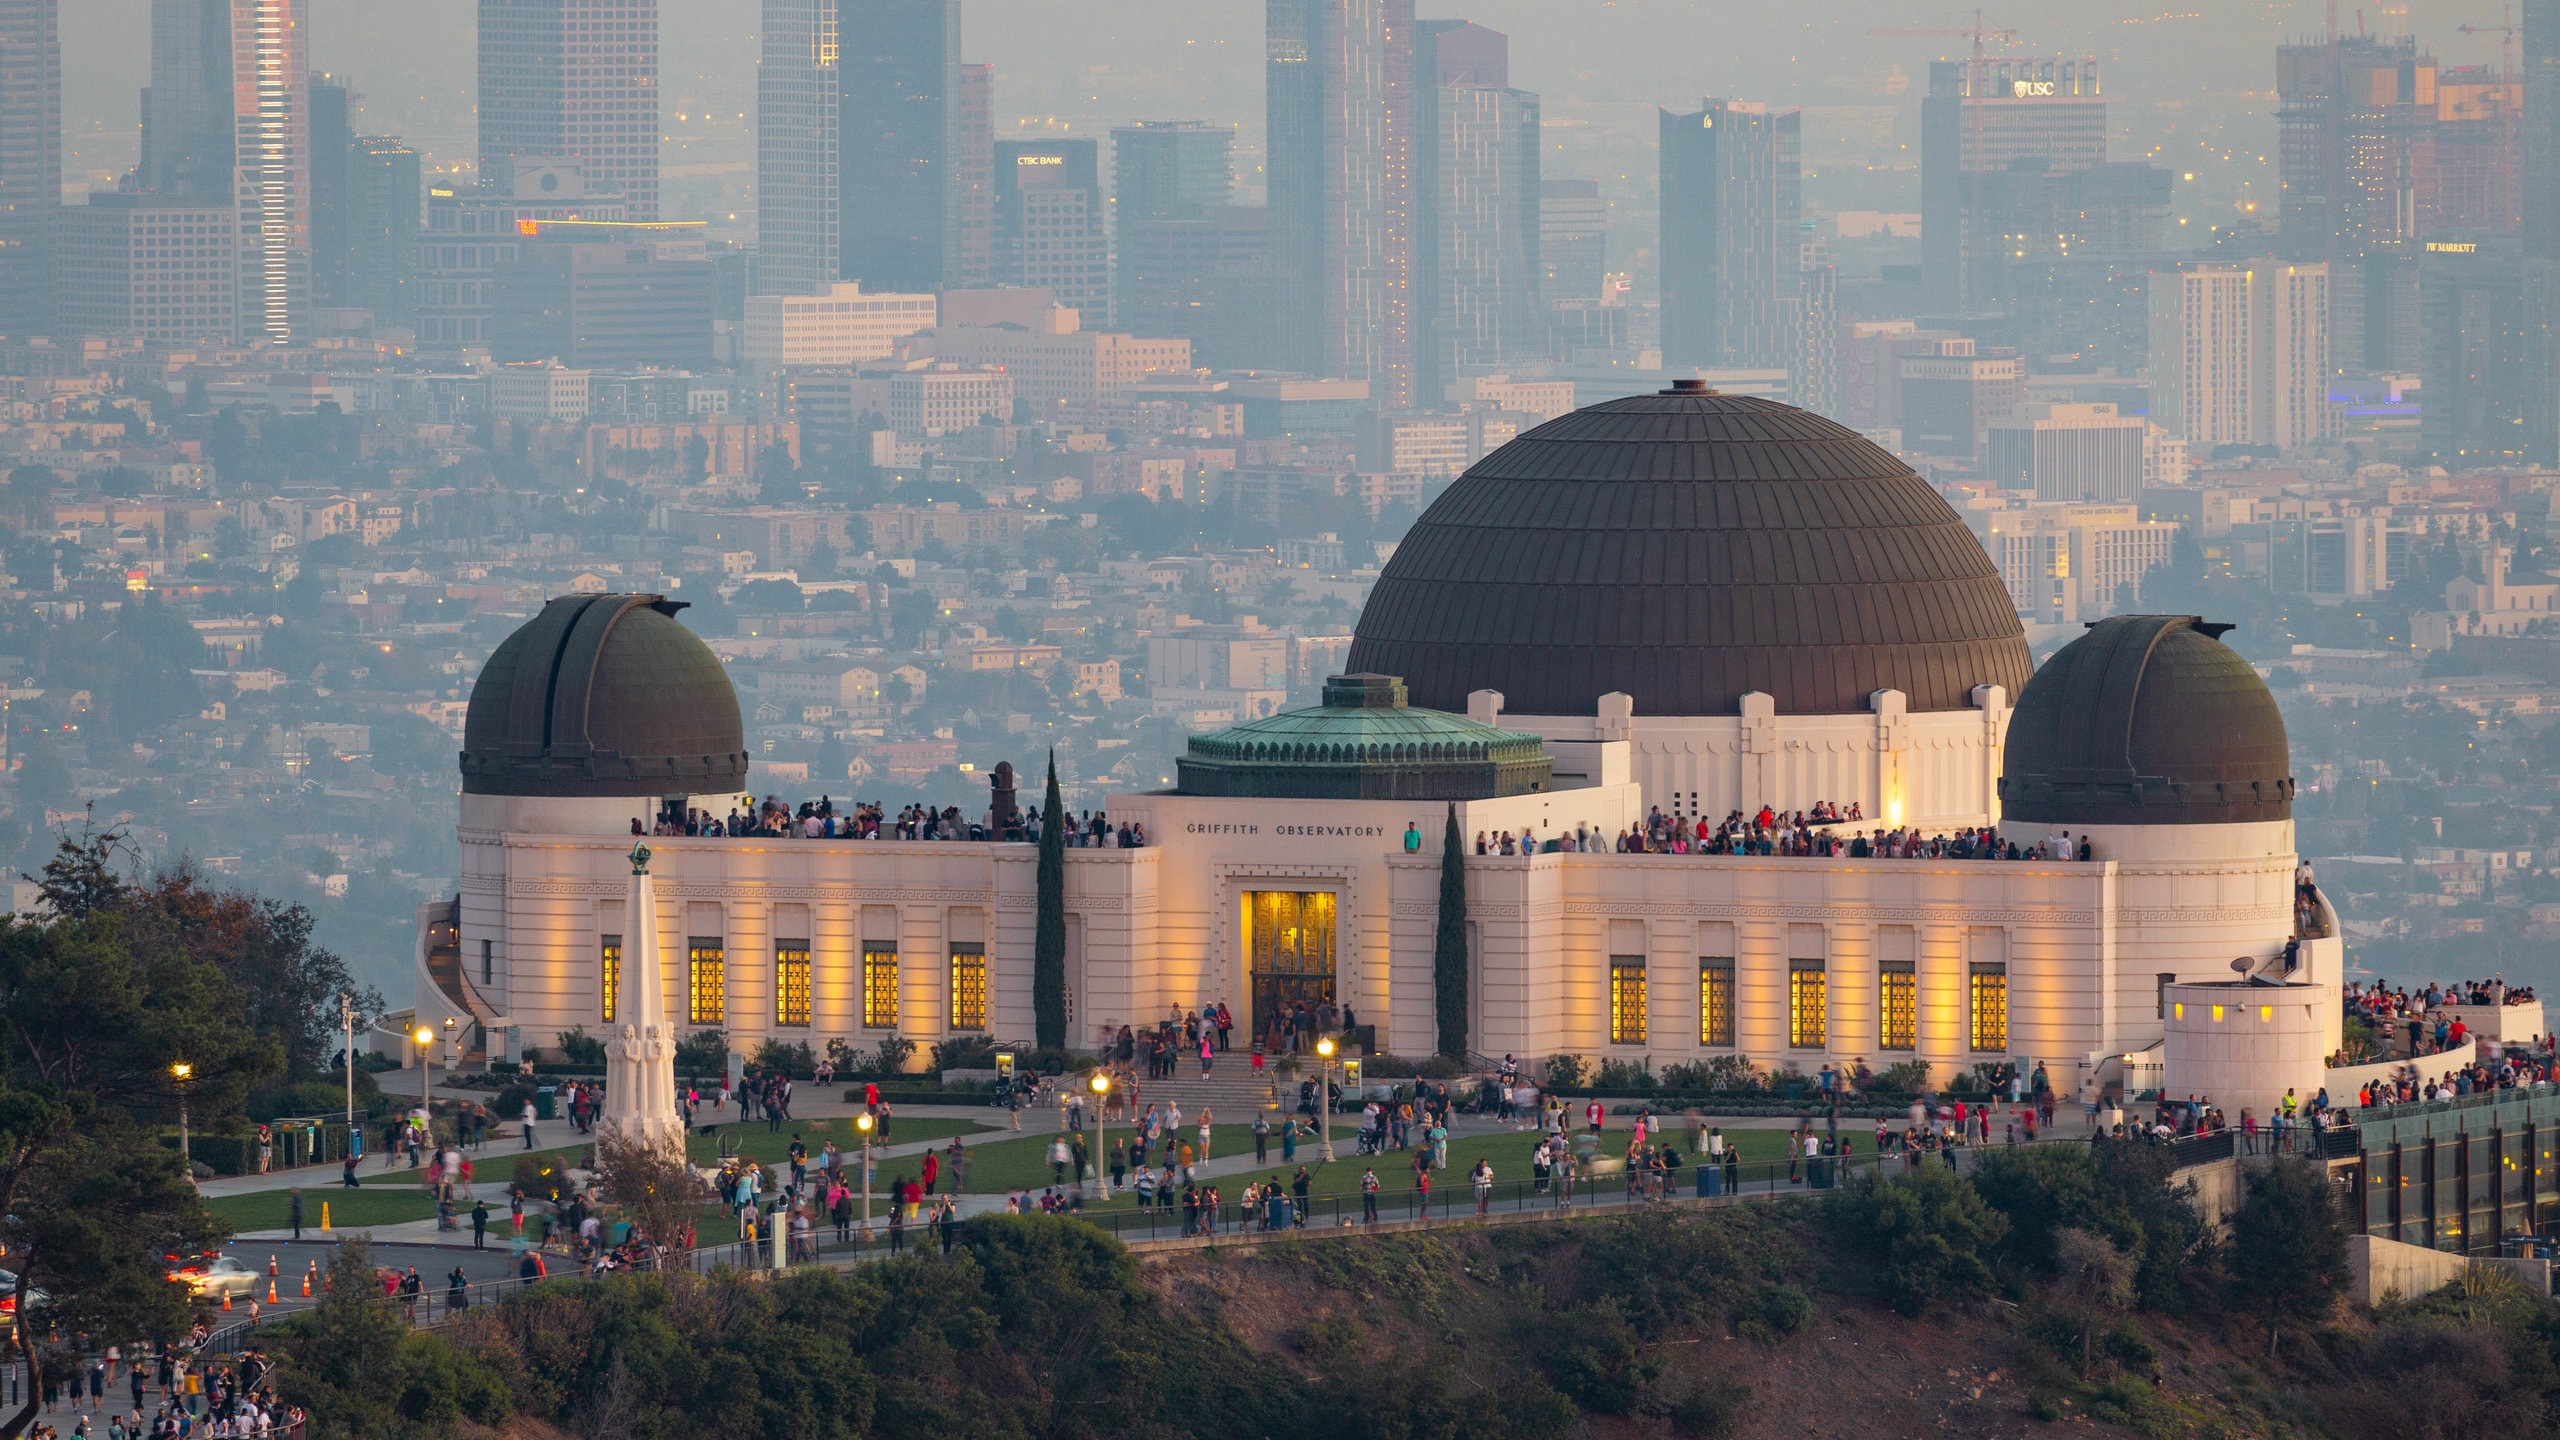 Griffith Observatory, Los Angeles, California, US